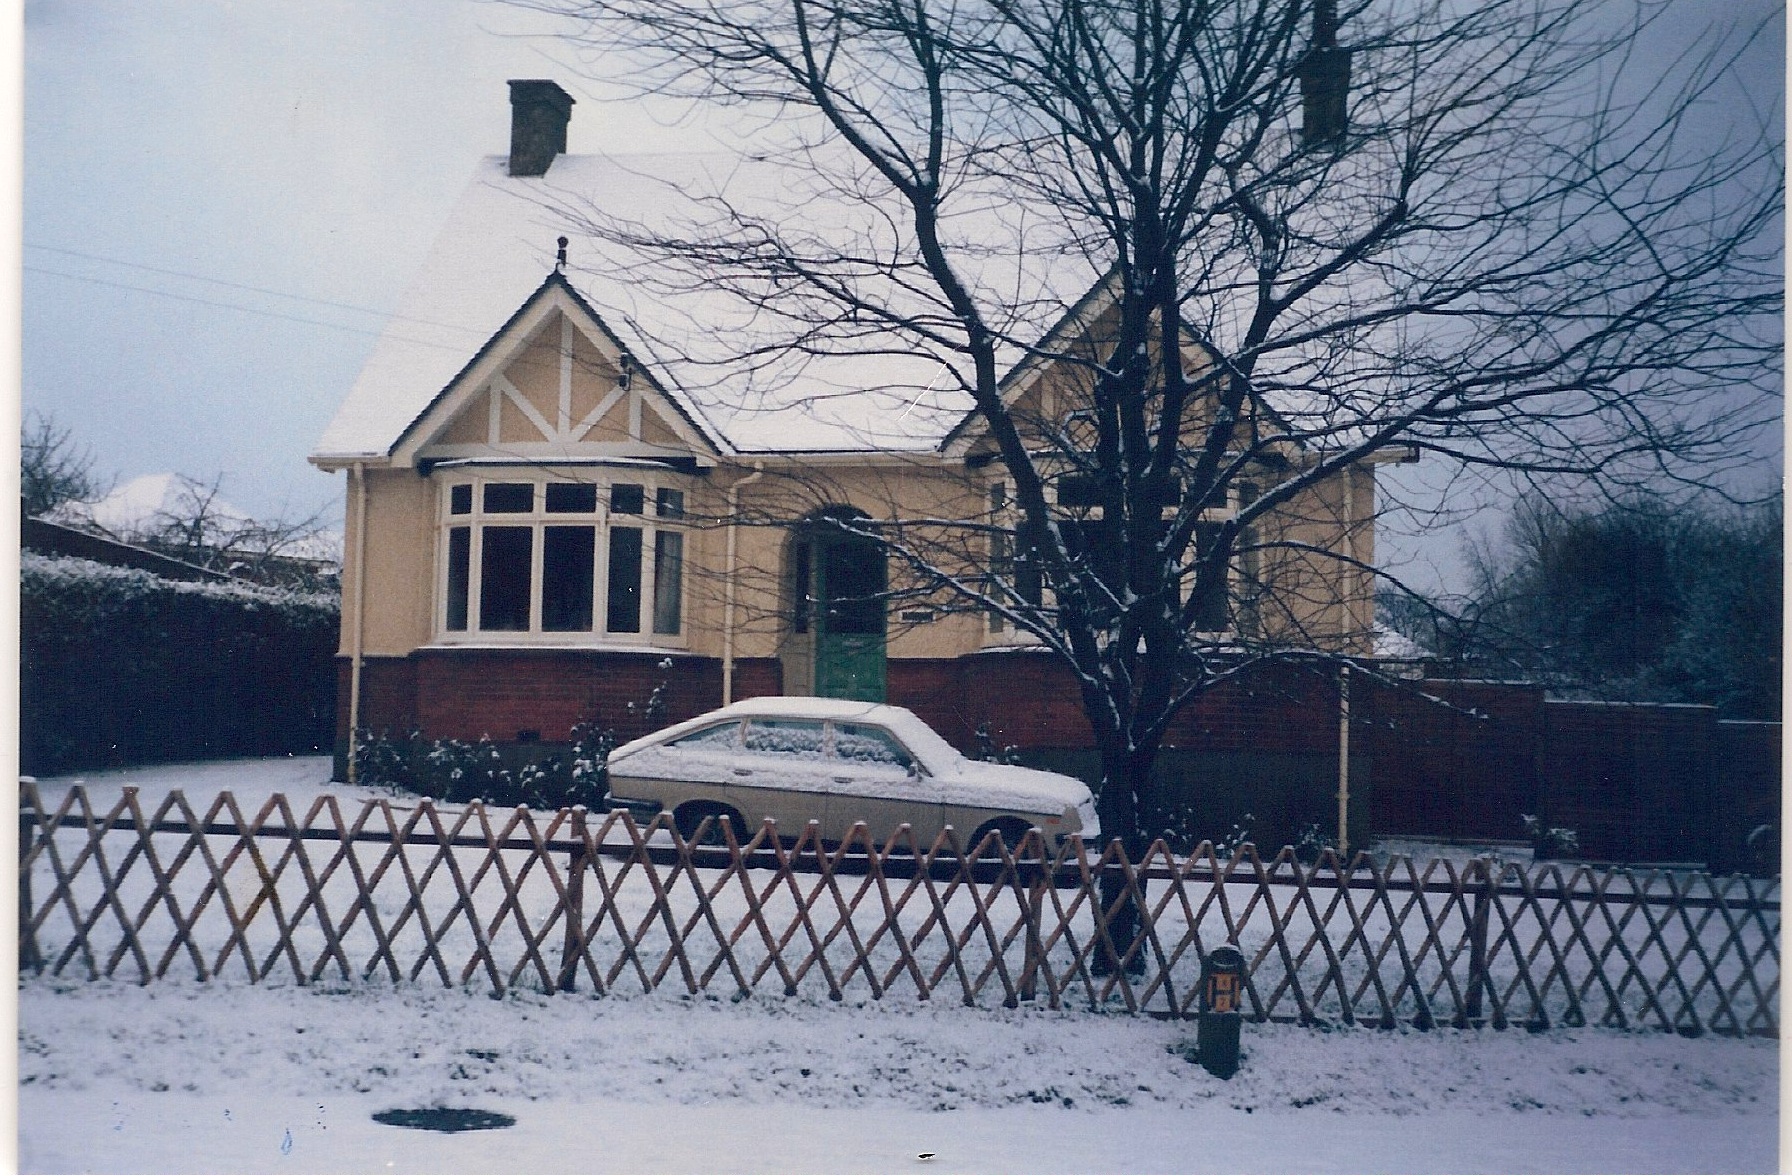 Slightly lighter snow at 27 Wigmore Road in 1987